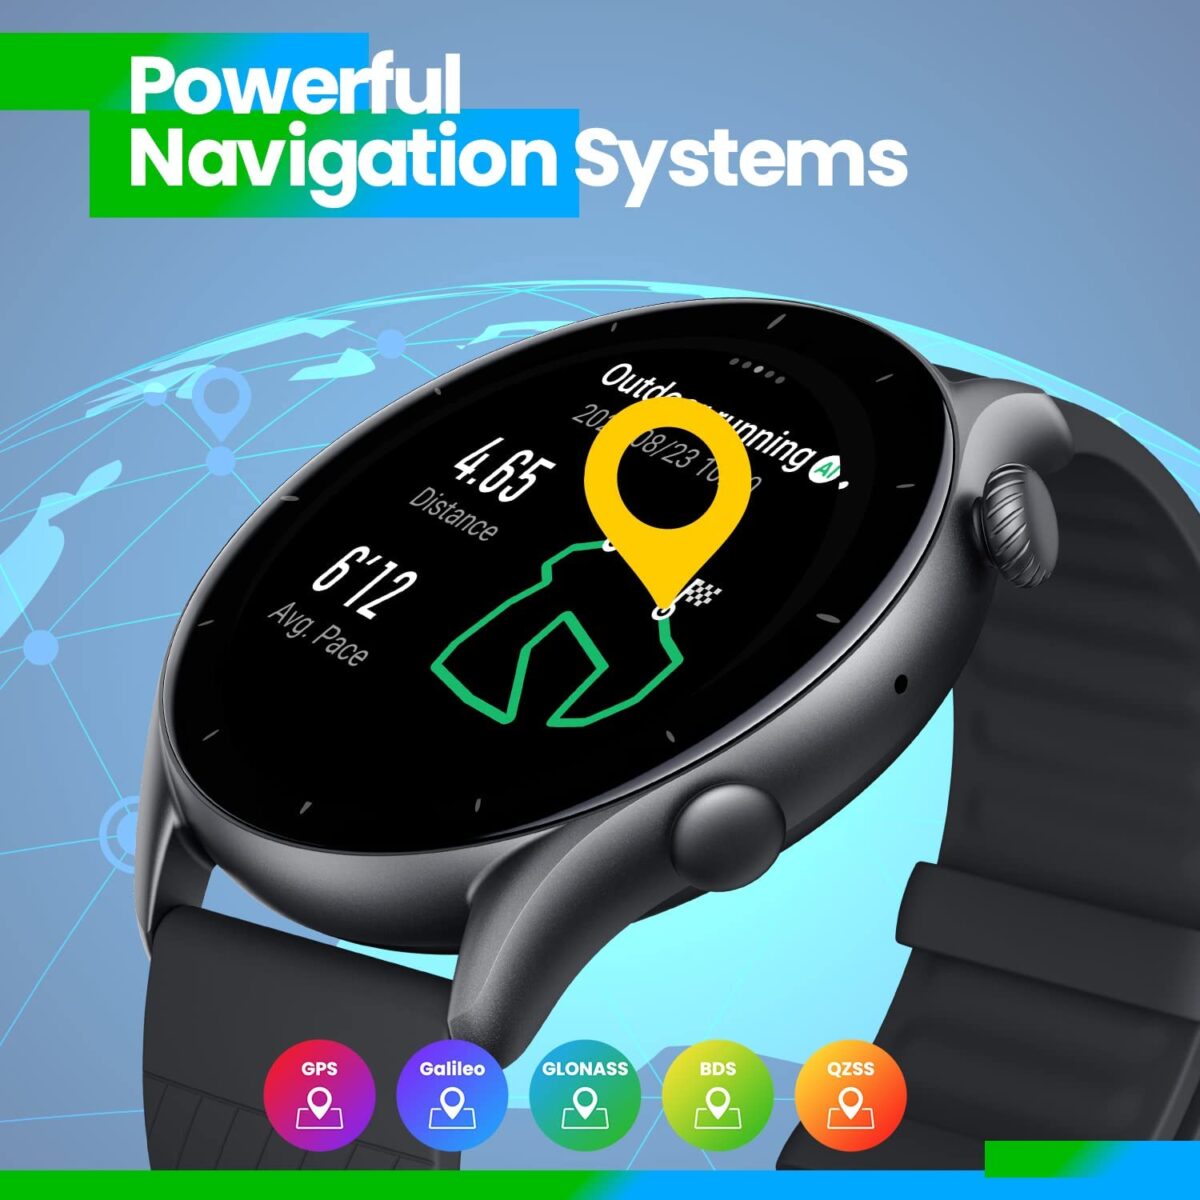 Powerful navigation systems